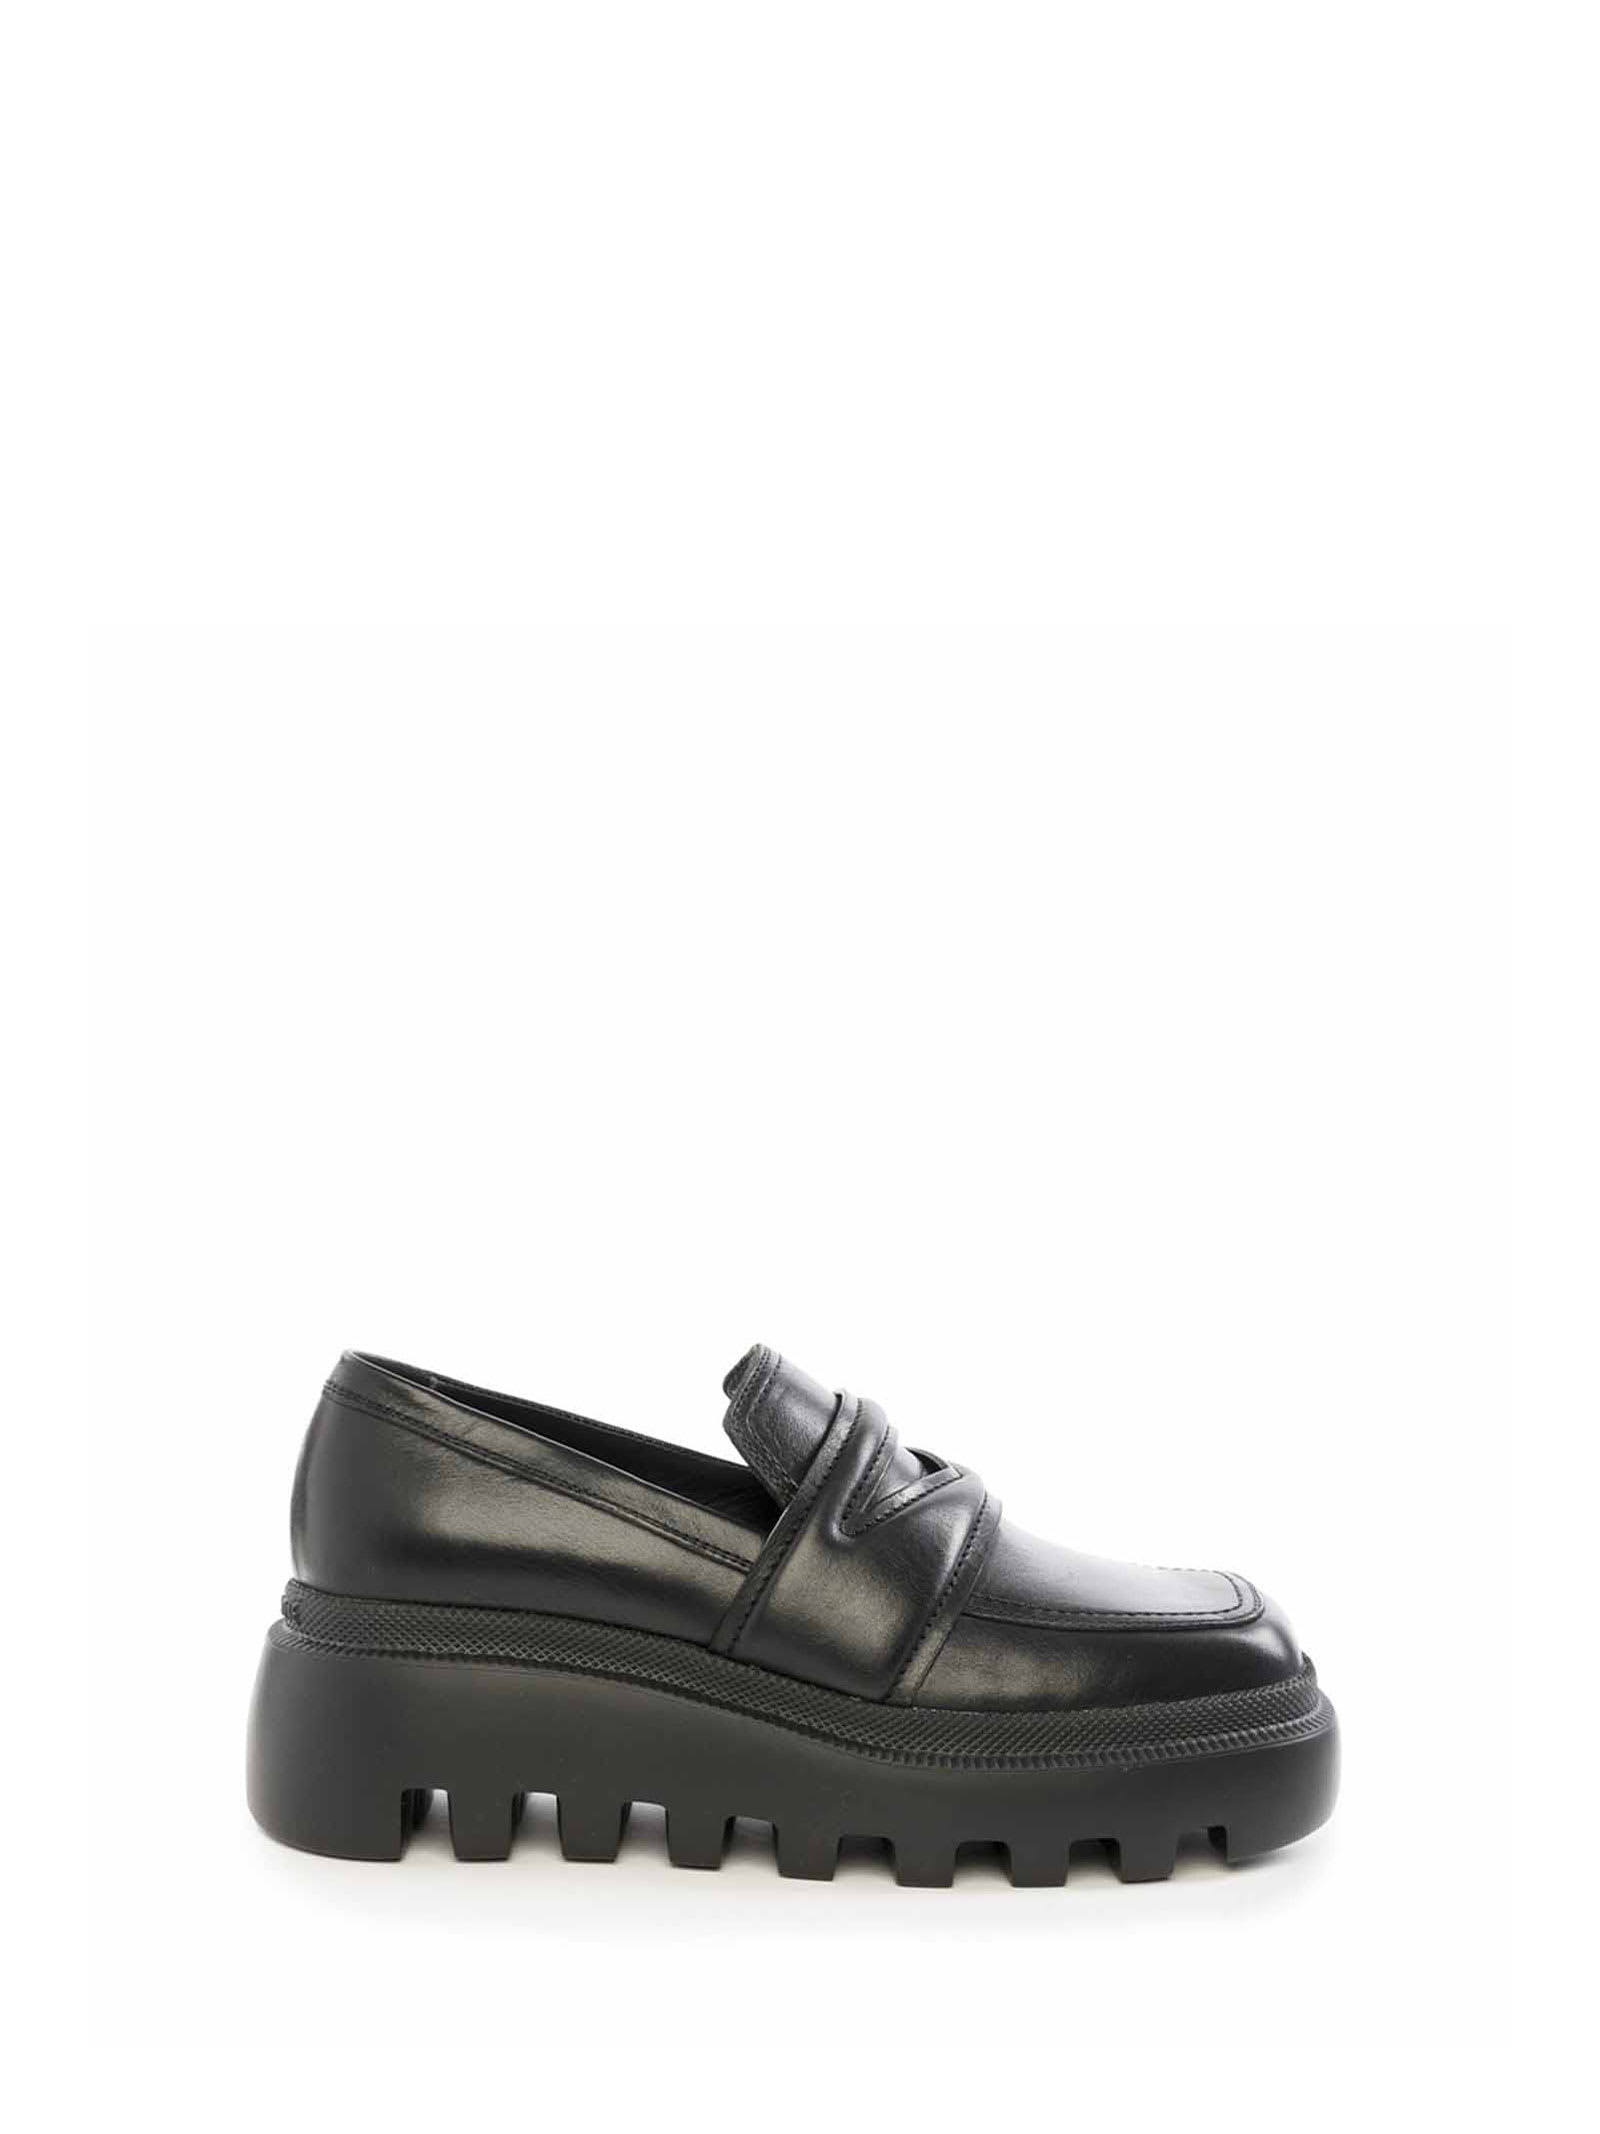 Vic Matié Gear Loafer With Track Sole